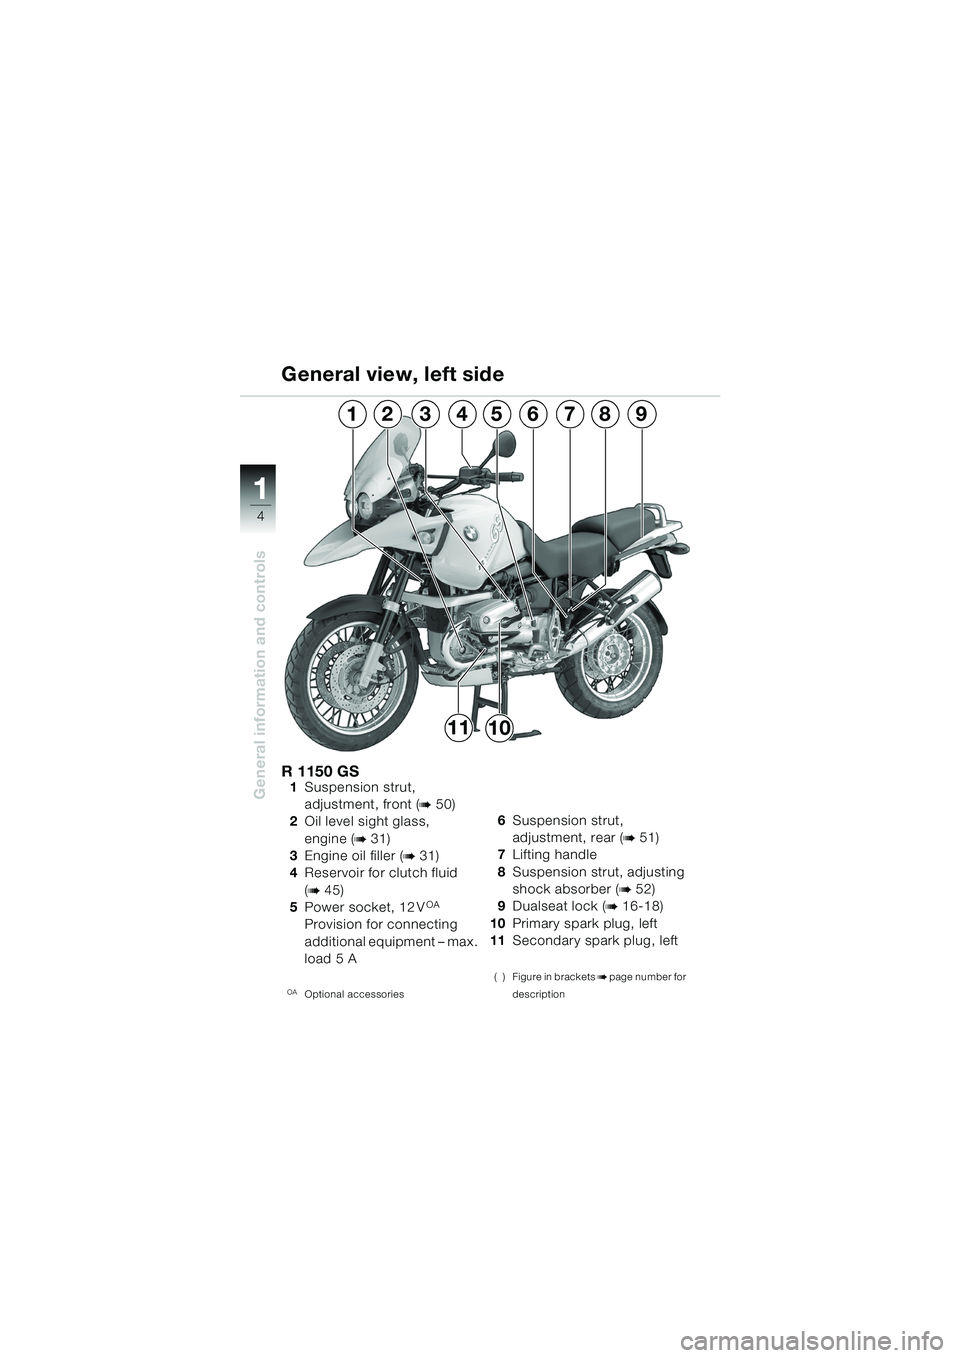 BMW MOTORRAD R 1150 GS Adventure 2002  Riders Manual (in English) 11
4
General information and controls
391256784
1011
R 1150 GS1Suspension strut,
adjustment, front (
b50)
2 Oil level sight glass, 
engine (
b31)
3 Engine oil filler (
b31)
4 Reservoir for clutch flui